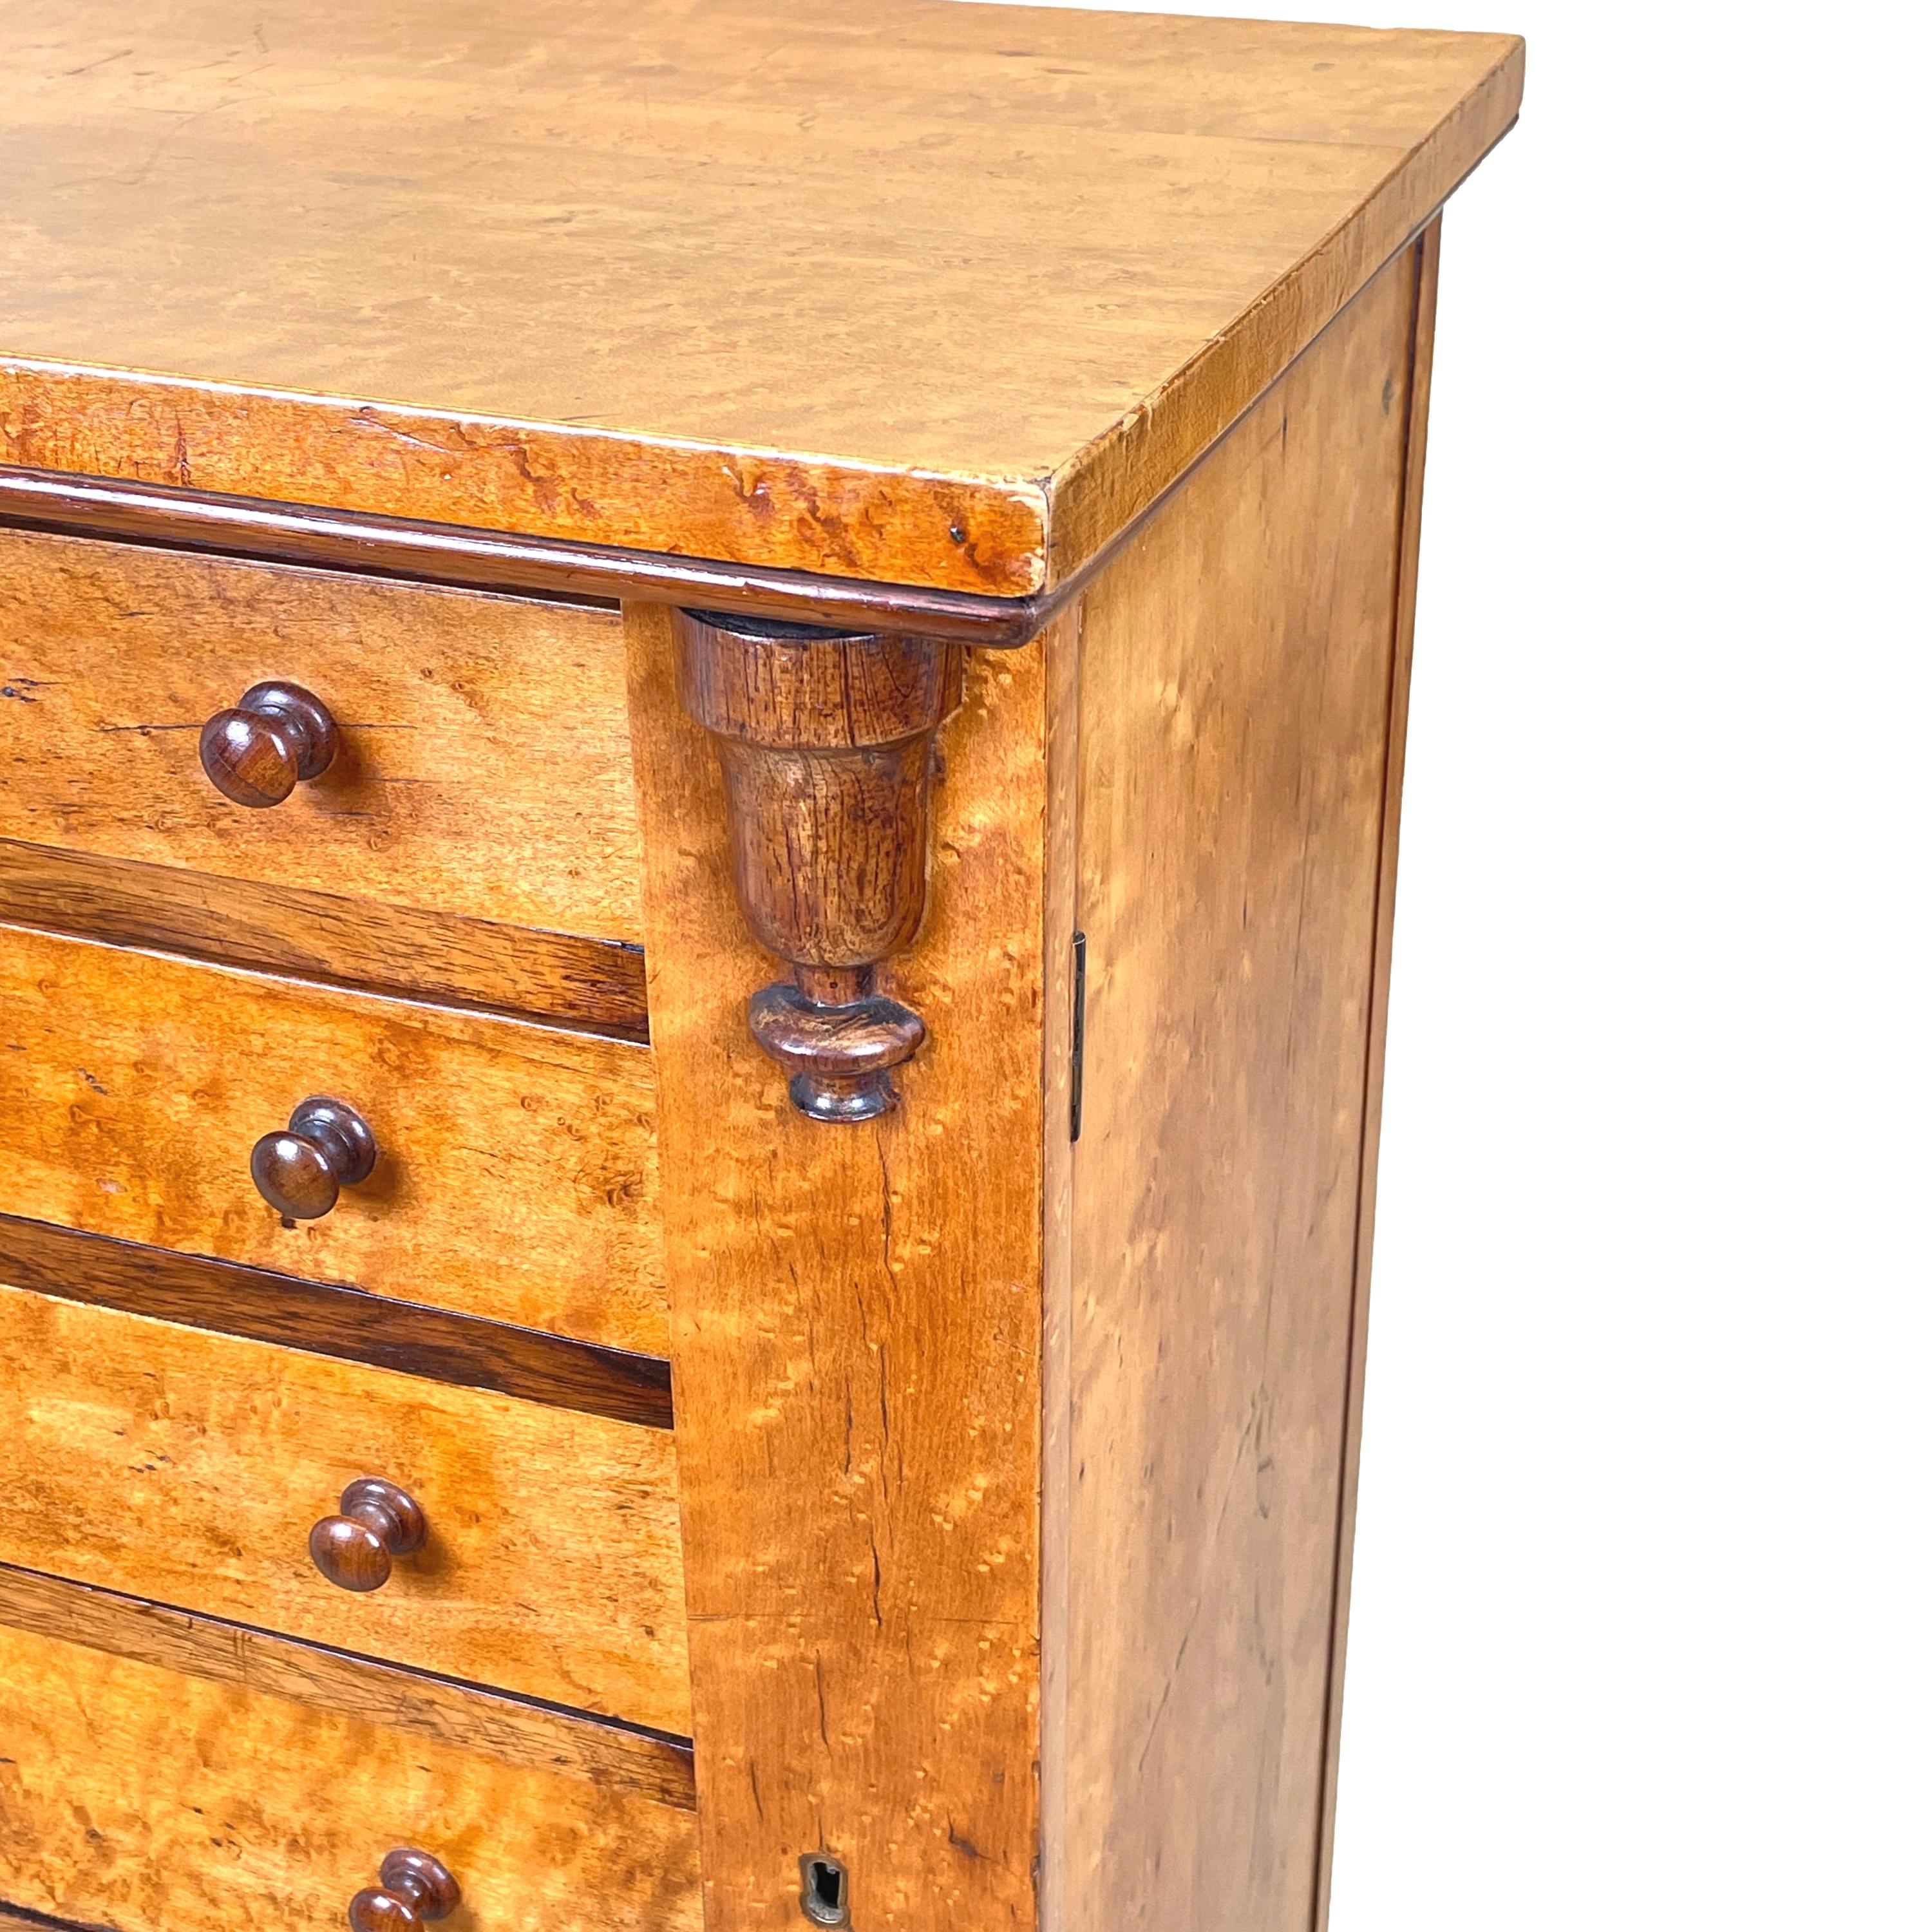 A delightful mid 19th century birds eye maple wood wellington chest of seven
drawers retaining original turned wooden knobs flanked by pilasters headed
with carved corbels raised on original plinth base

(It is believed that the first Duke of